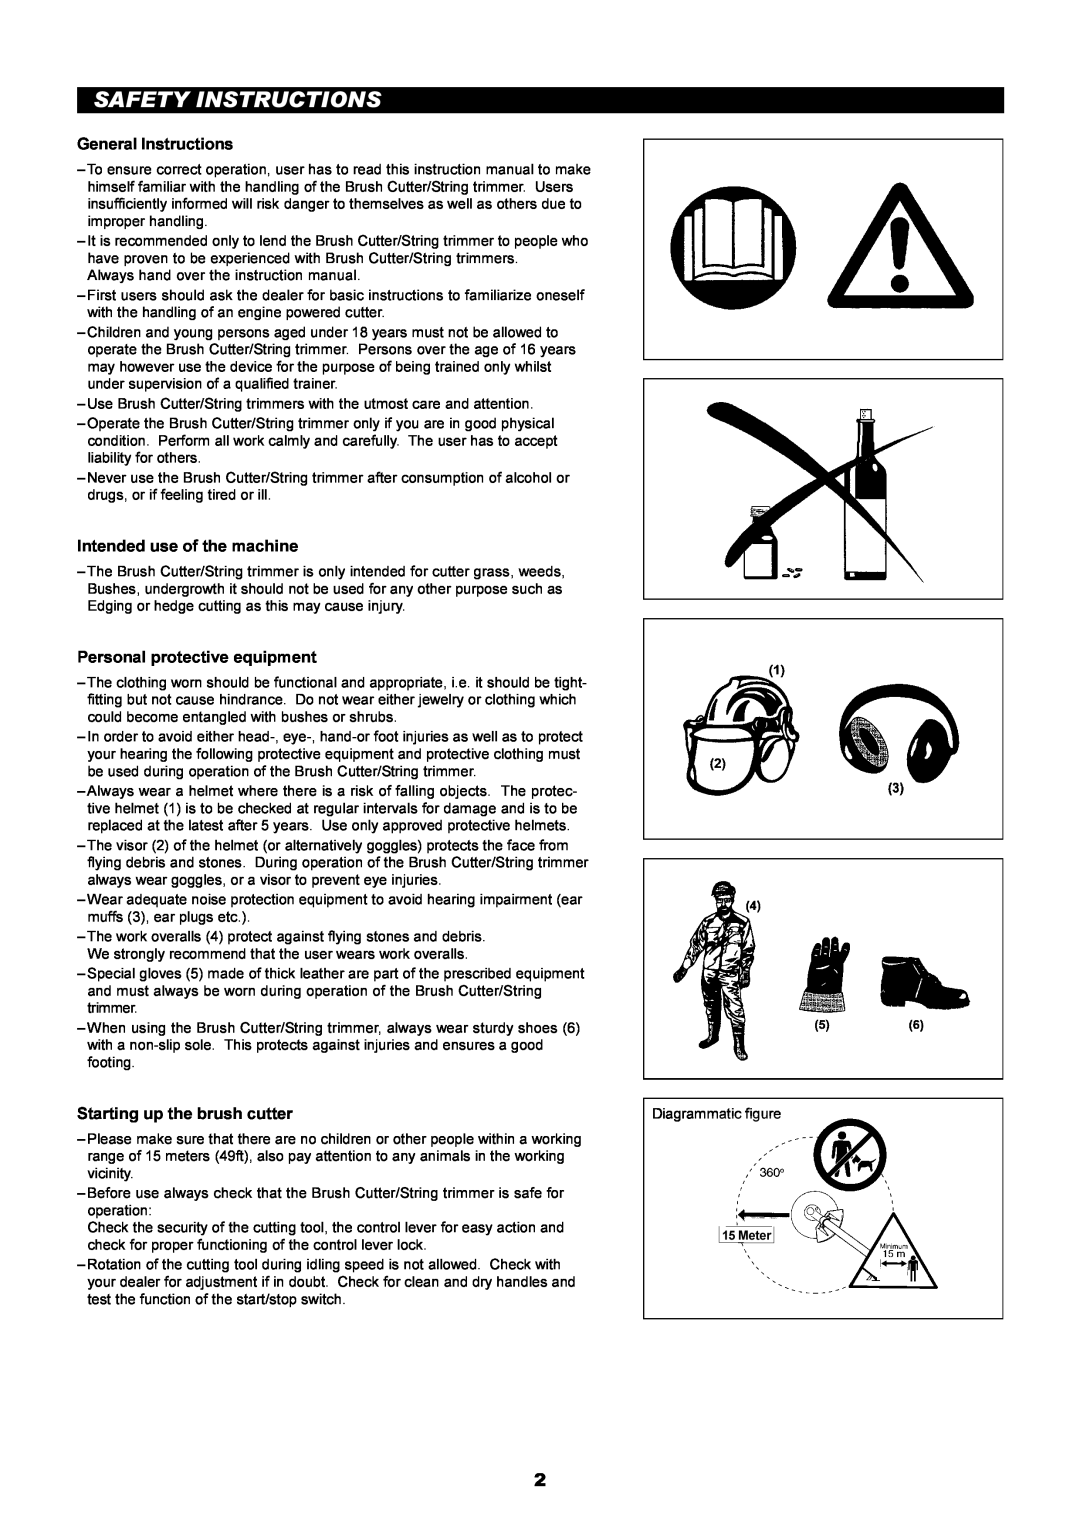 Dolmar MS-251.4 Safety Instructions, General Instructions, Intended use of the machine, Personal protective equipment 